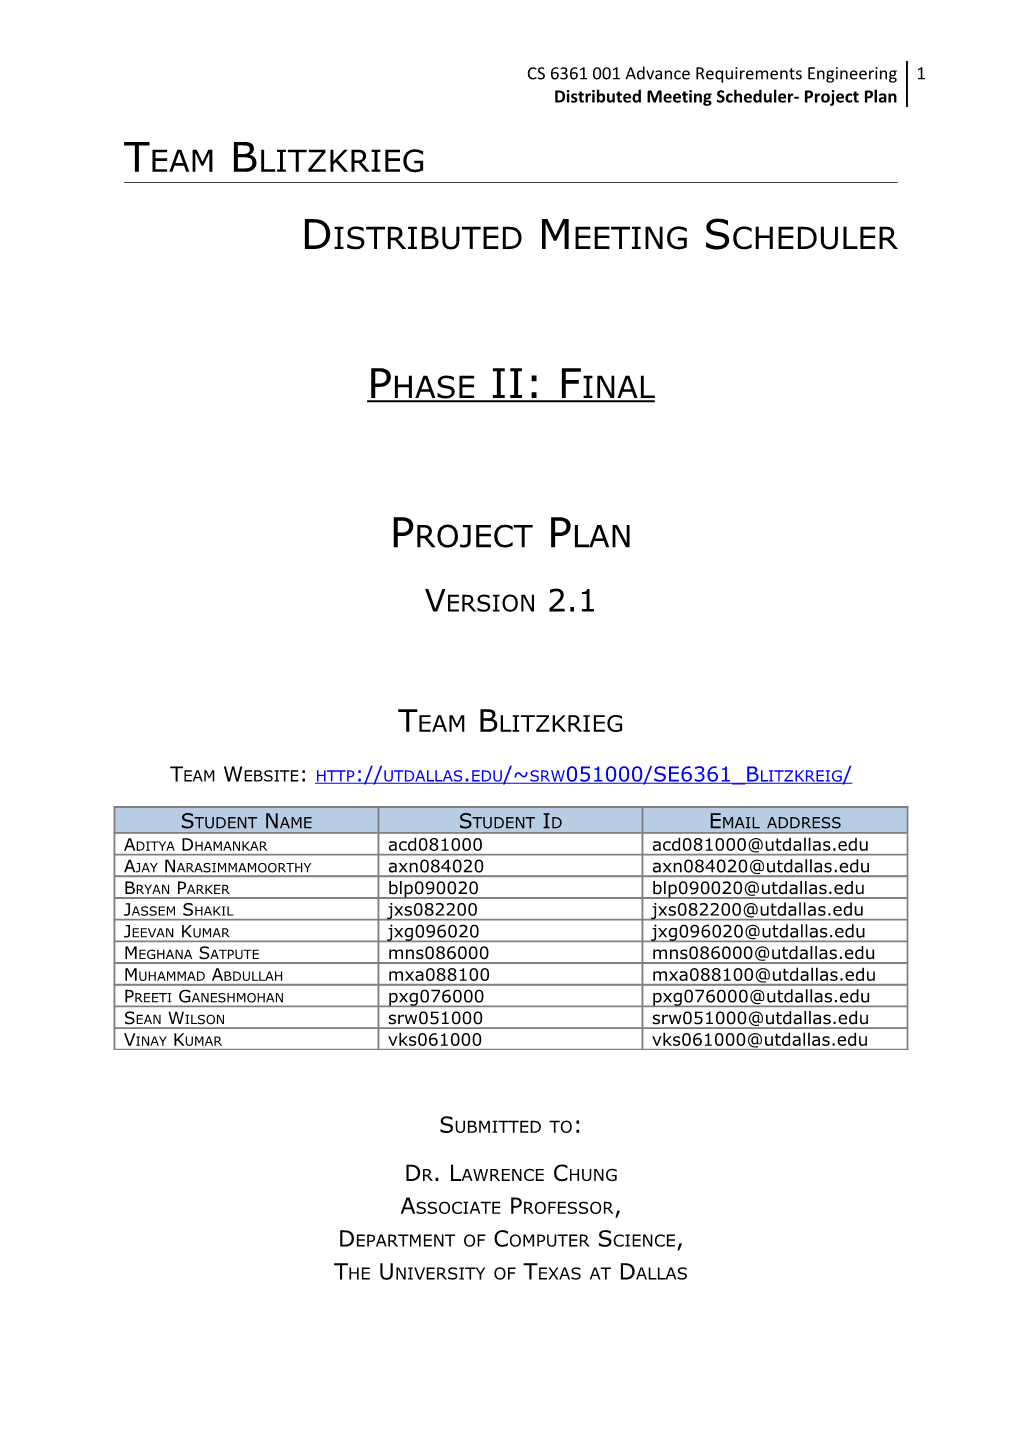 Meeting Scheduling System- Project Plan